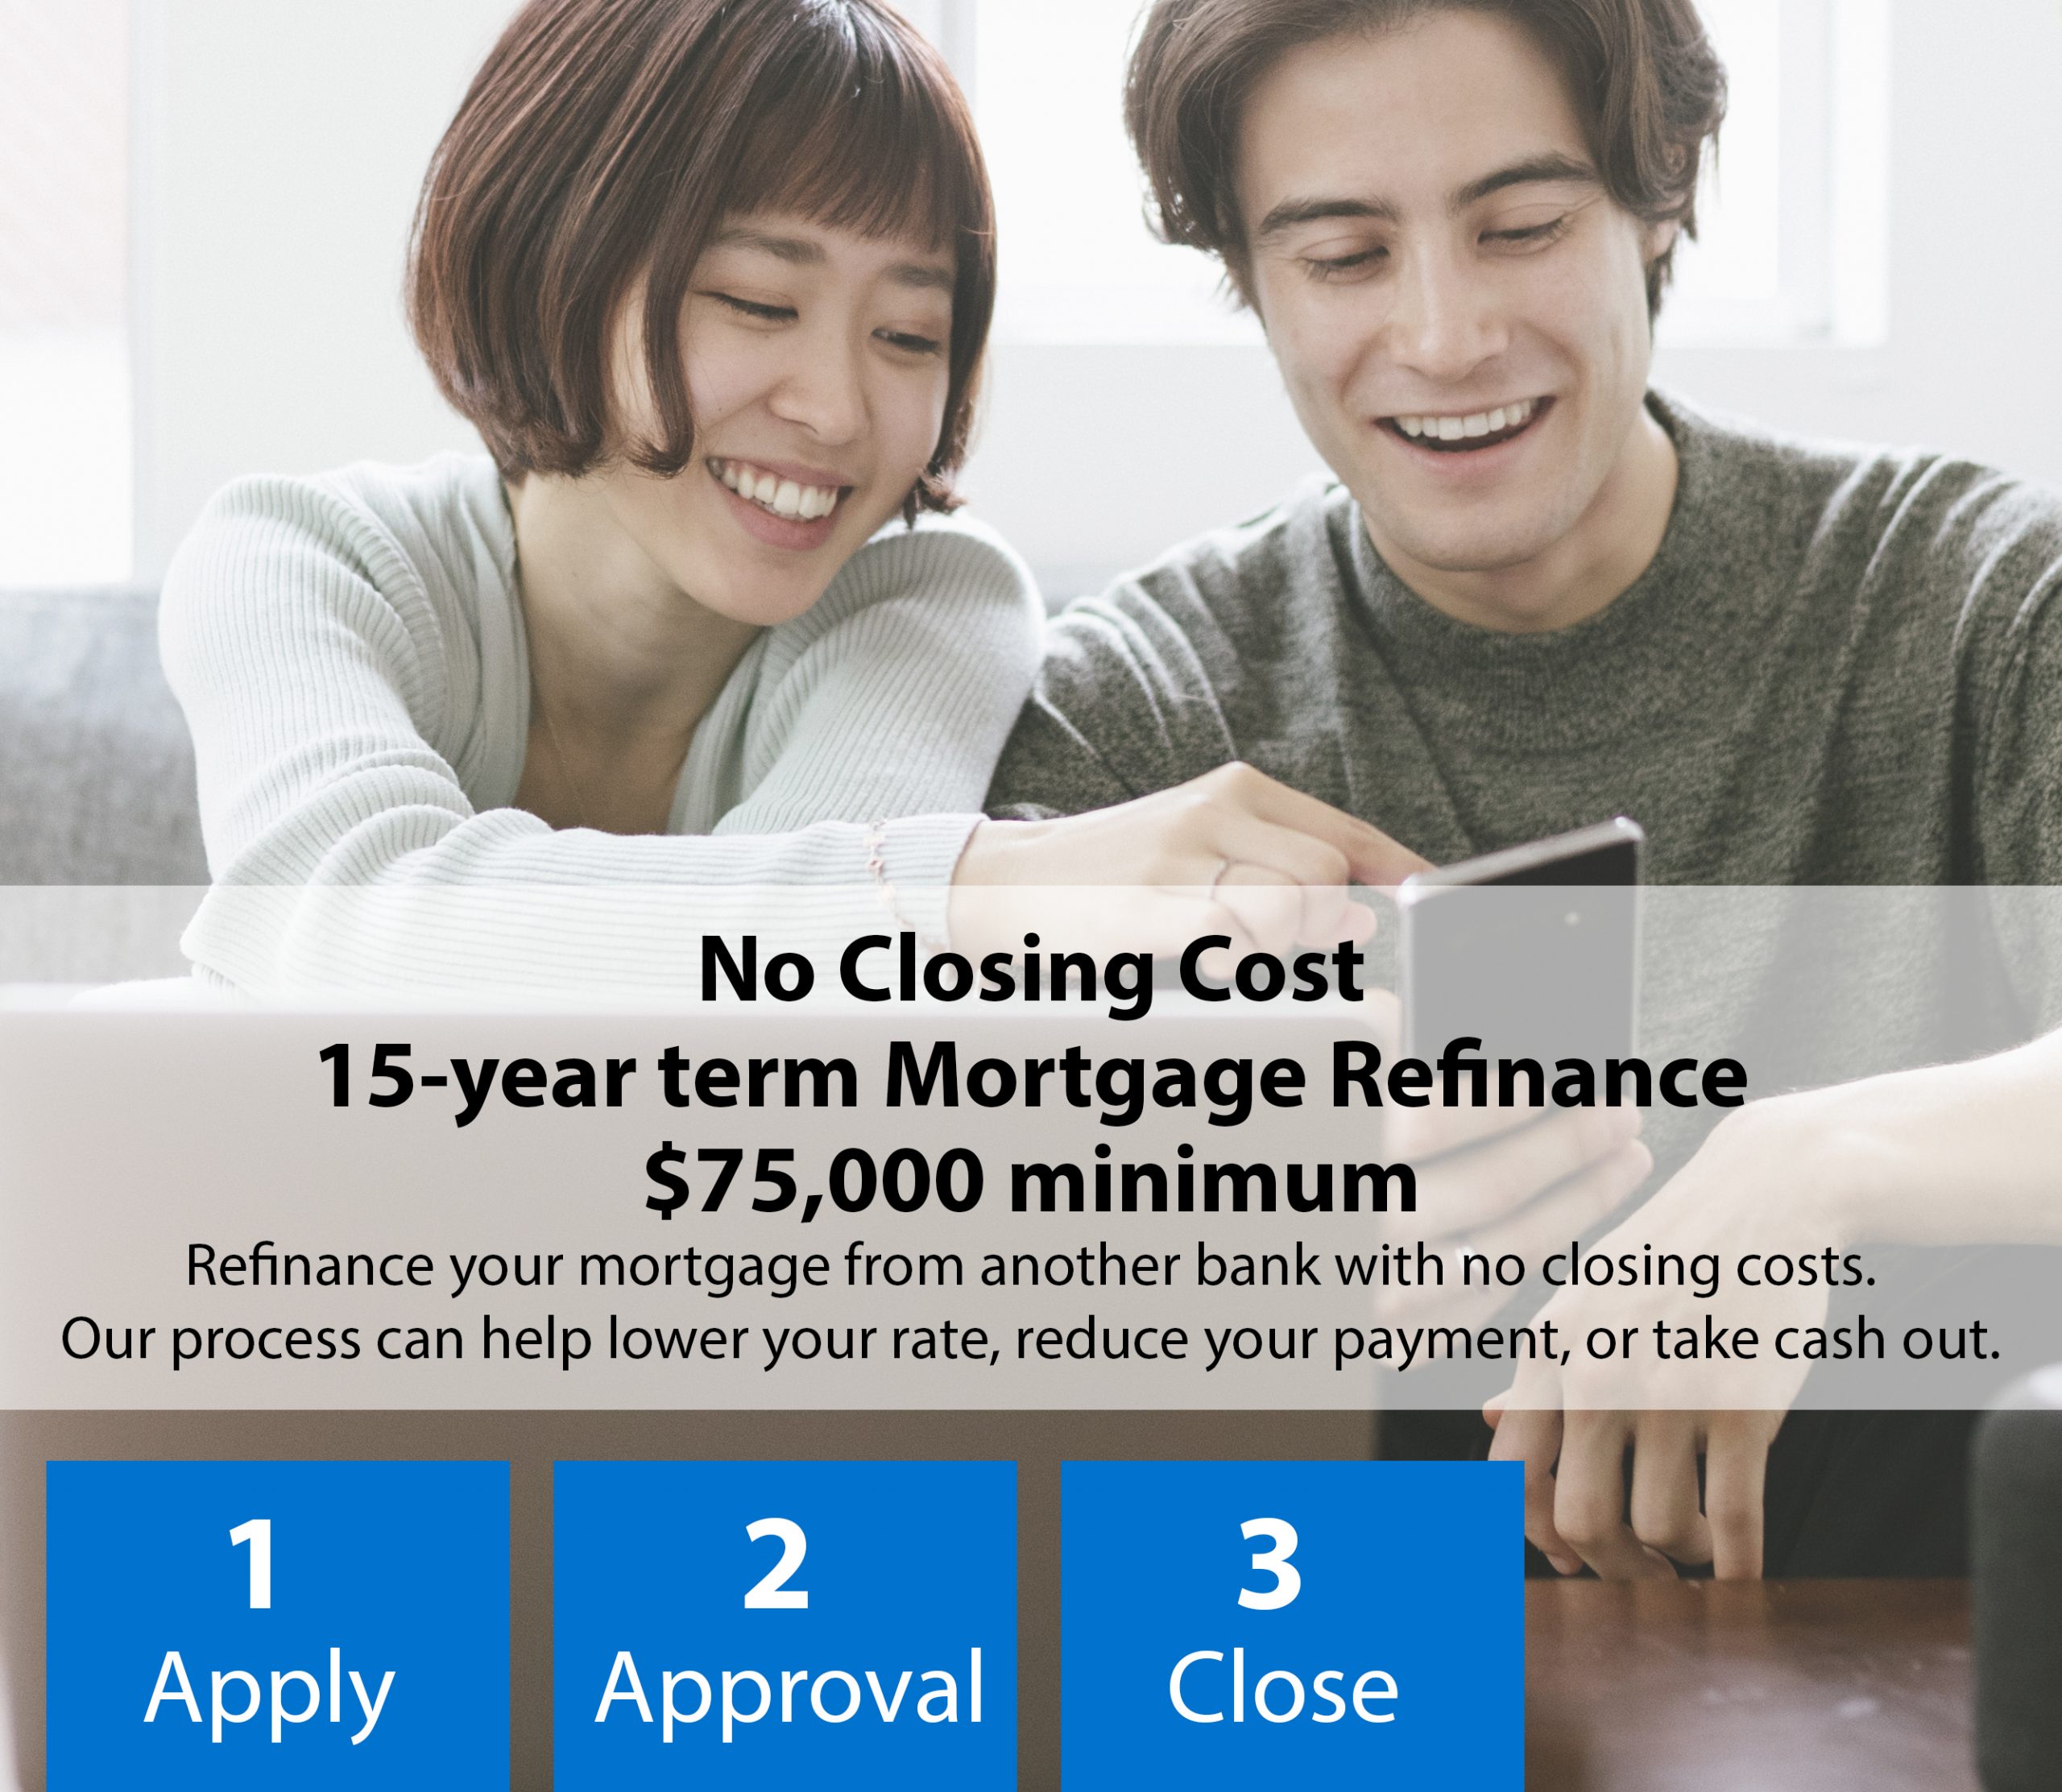 No Closing Cost 15-year term Mortgage Refinance $75,000 minimum Refinance your mortgage from another bank with no closing costs. Our process can help lower your rate, reduce your payment, or take cash out.